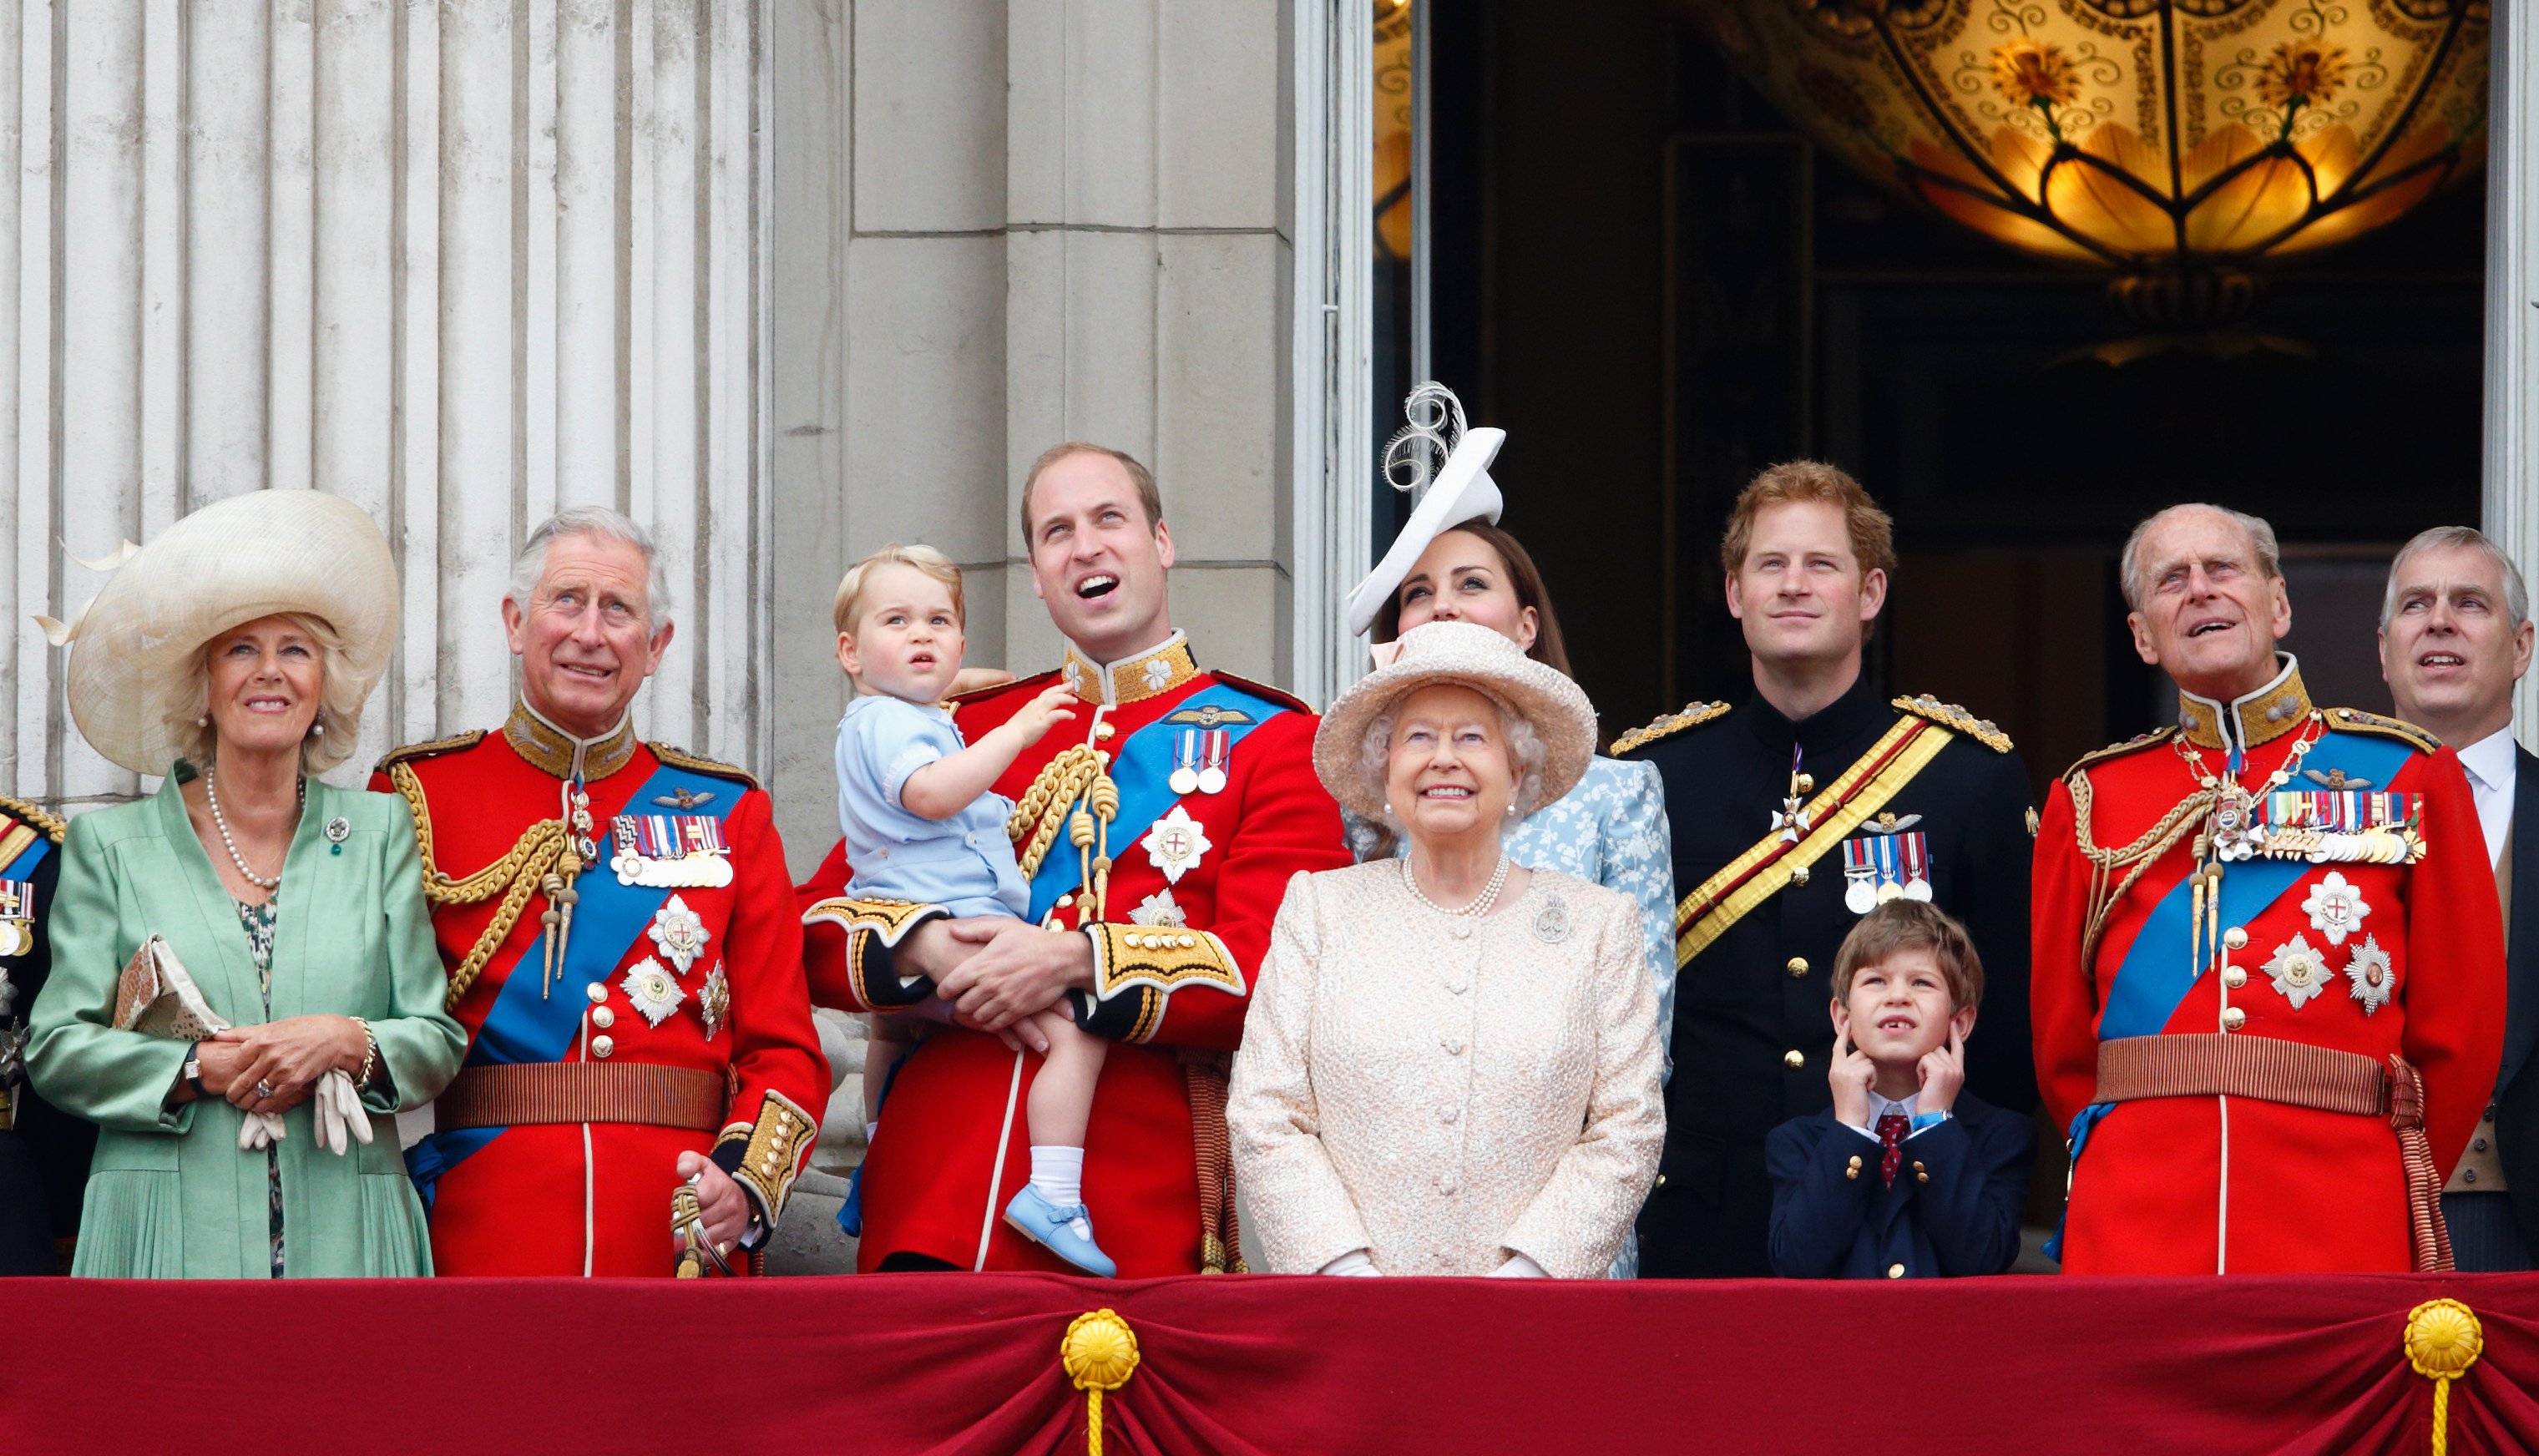 Camilla, Queen Consort, King Charle, Prince William, Prince George, Catherine, Duchess of Cambridge, Queen Elizabeth II, Prince Harry, James, Viscount Severn, and Prince Philip, Duke of Edinburgh stand on the balcony of Buckingham Palace during Trooping the Colour on June 13, 2015, in London, England. | Source: Getty Images